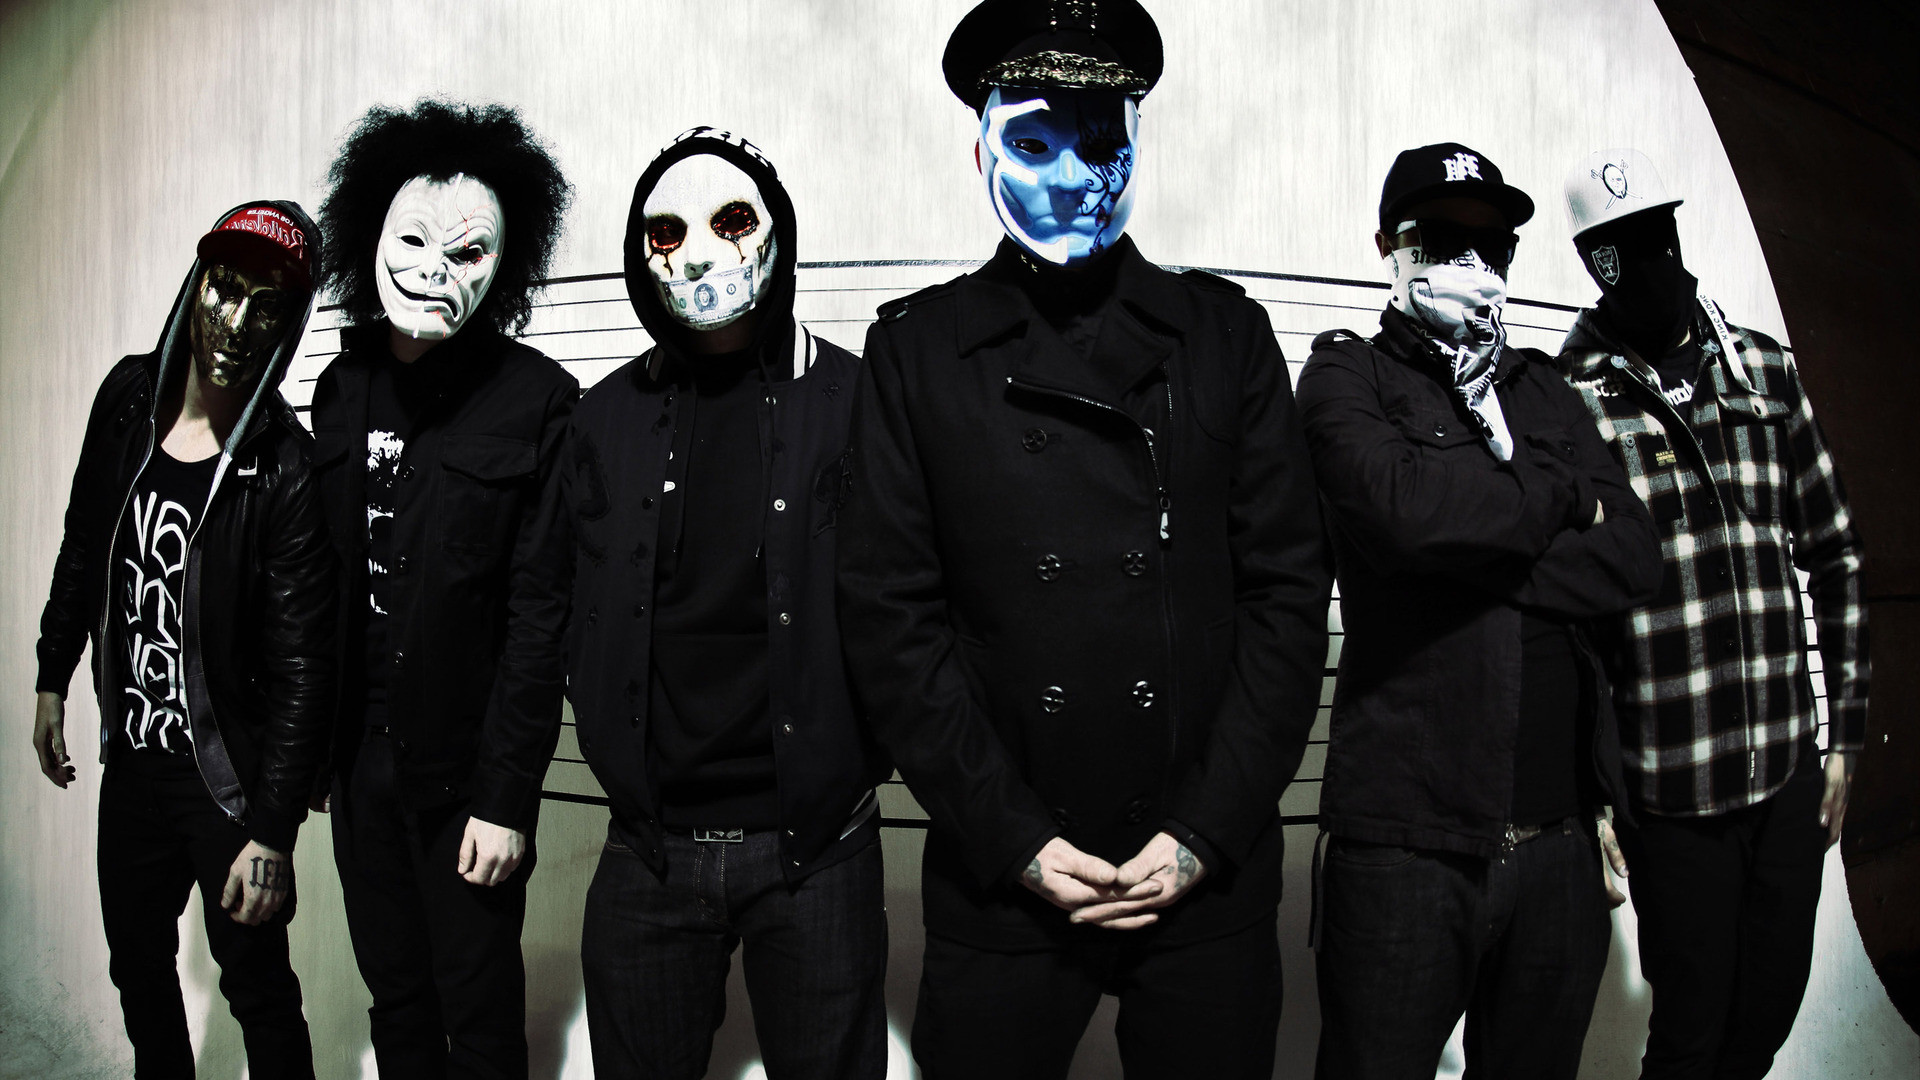 1920x1080 Hollywood Undead Wallpaper